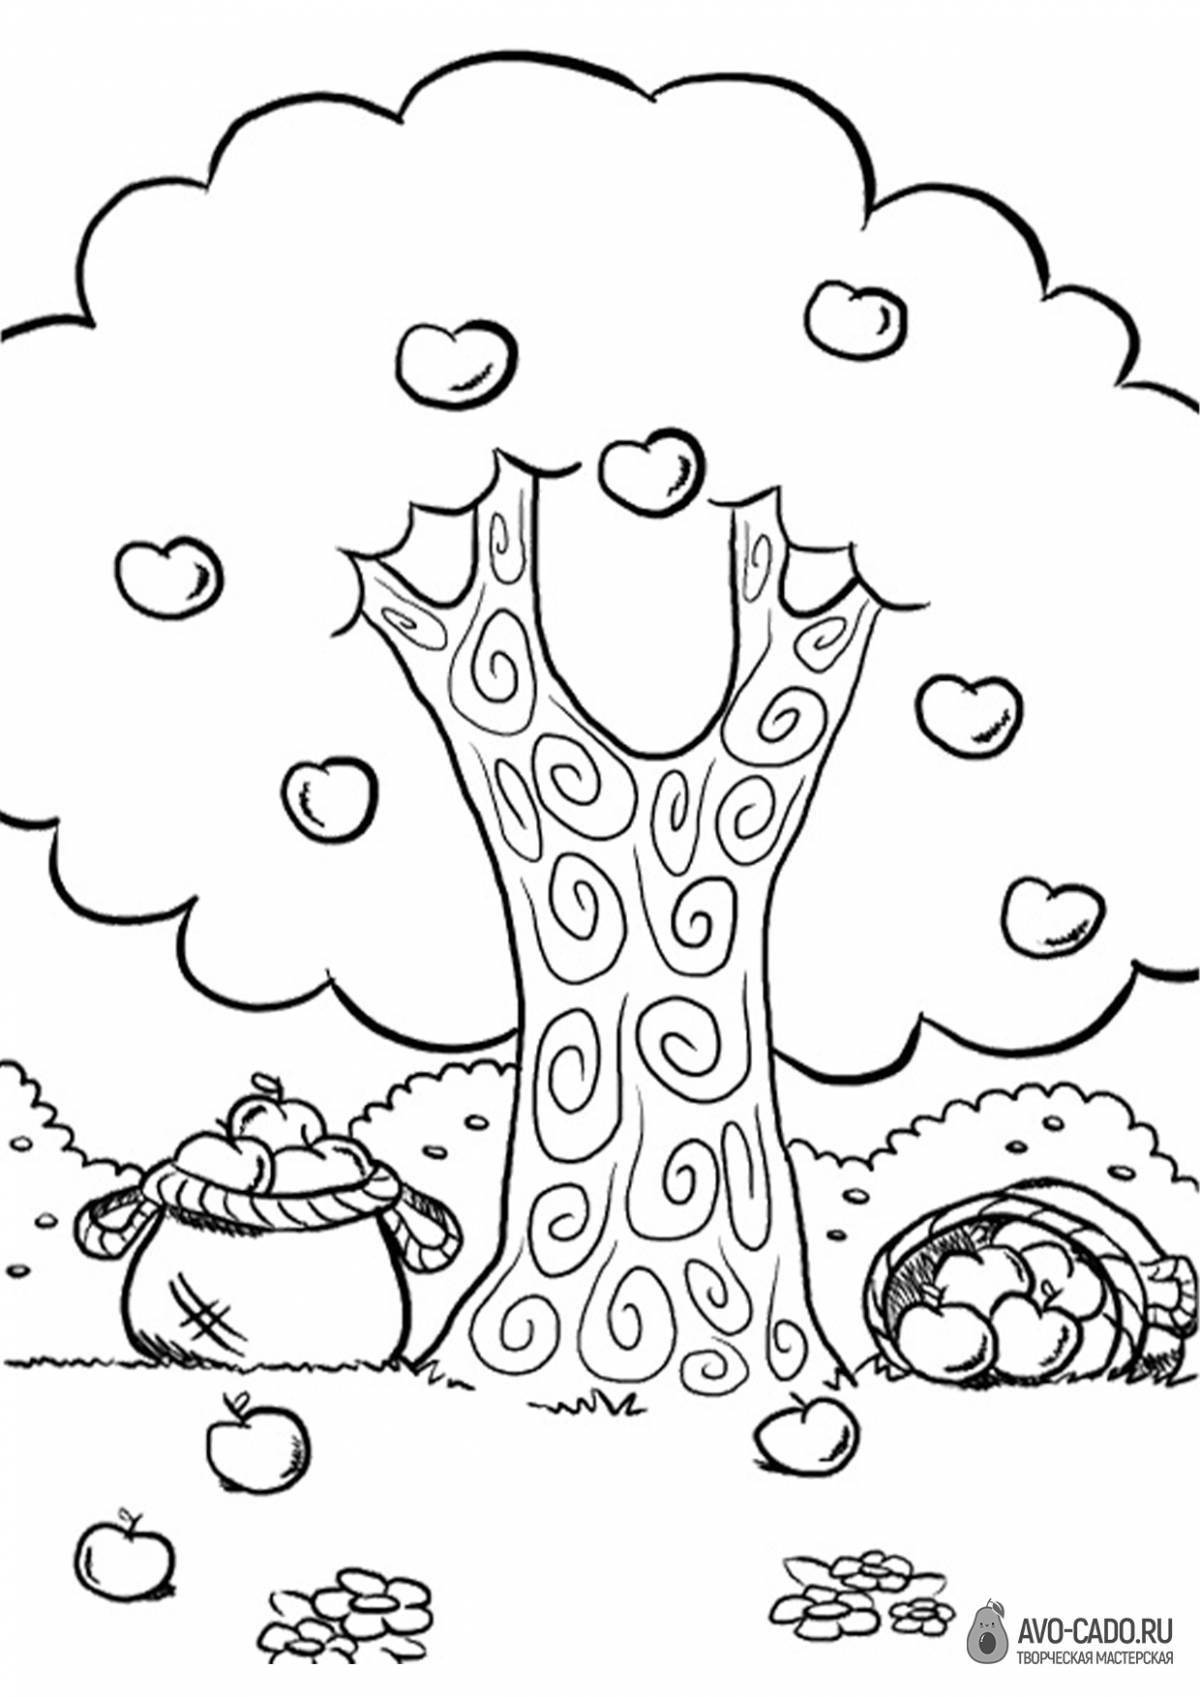 Colorful tree coloring book for 2-3 year olds